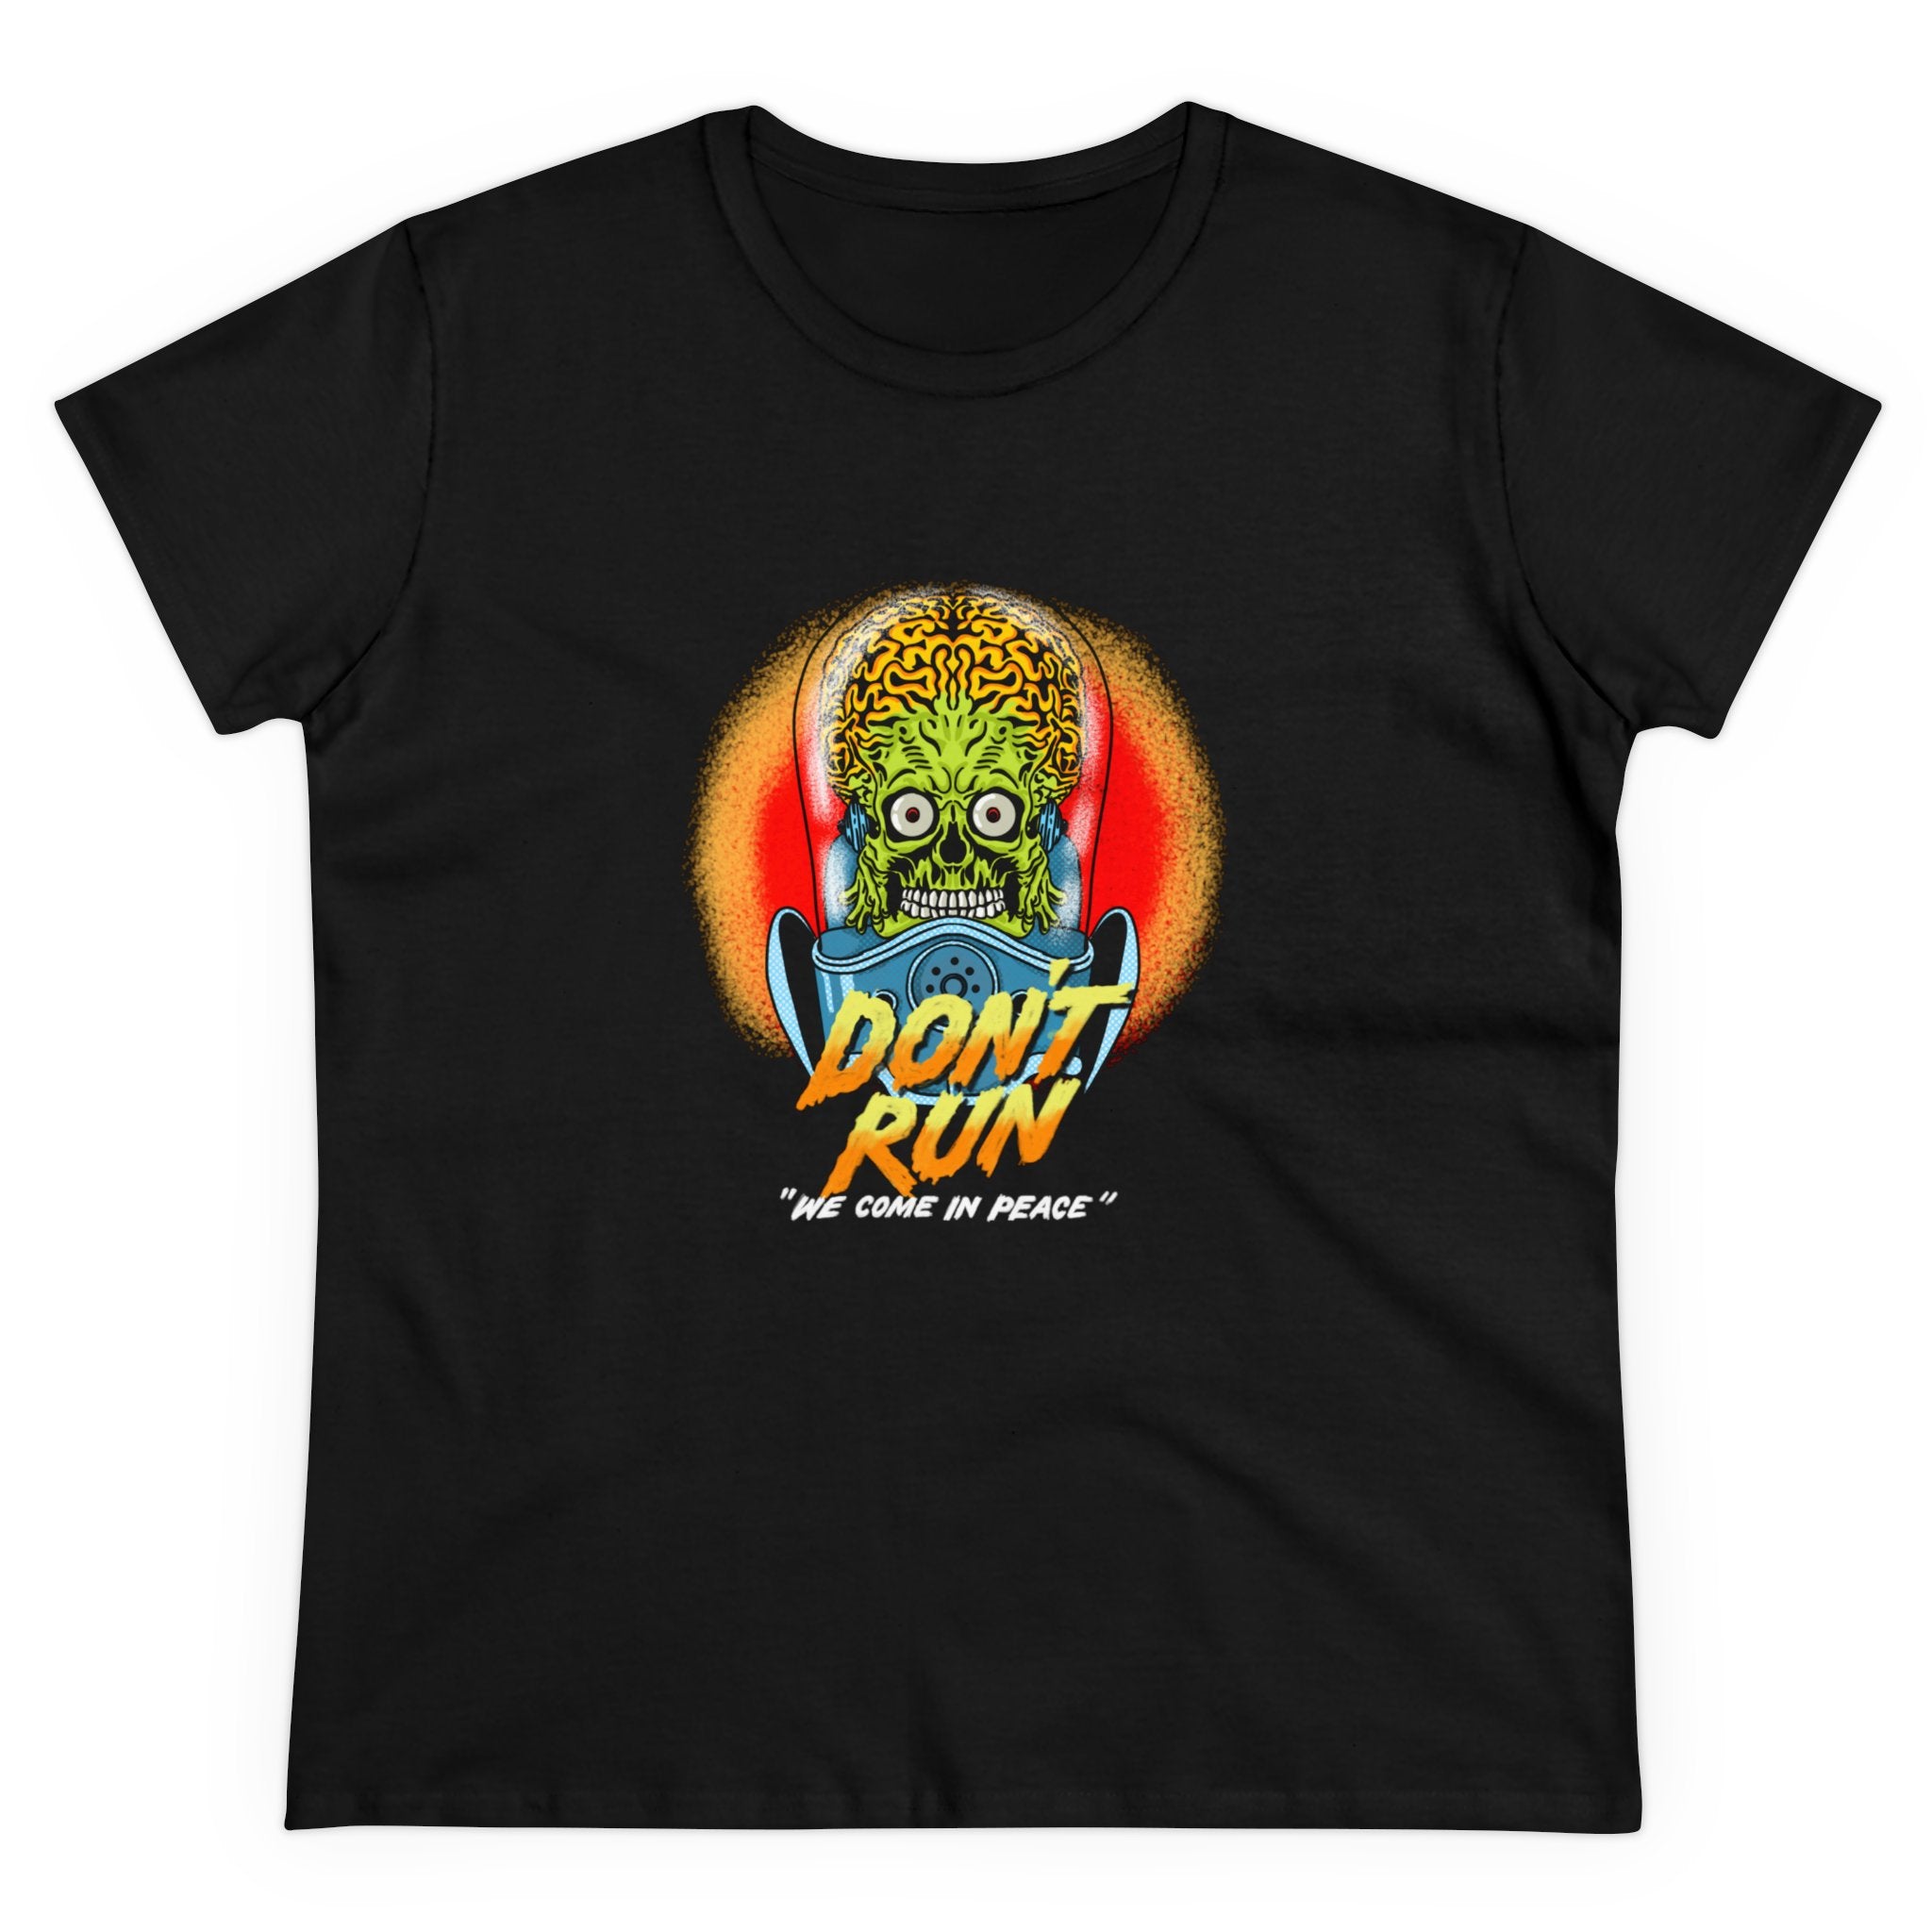 The Don't Run - Women's Tee in soft cotton features an illustration of a green alien with a large brain and the text "DON'T RUN" above "He Comes in Peace" printed on the front, ensuring a great fit and comfort.